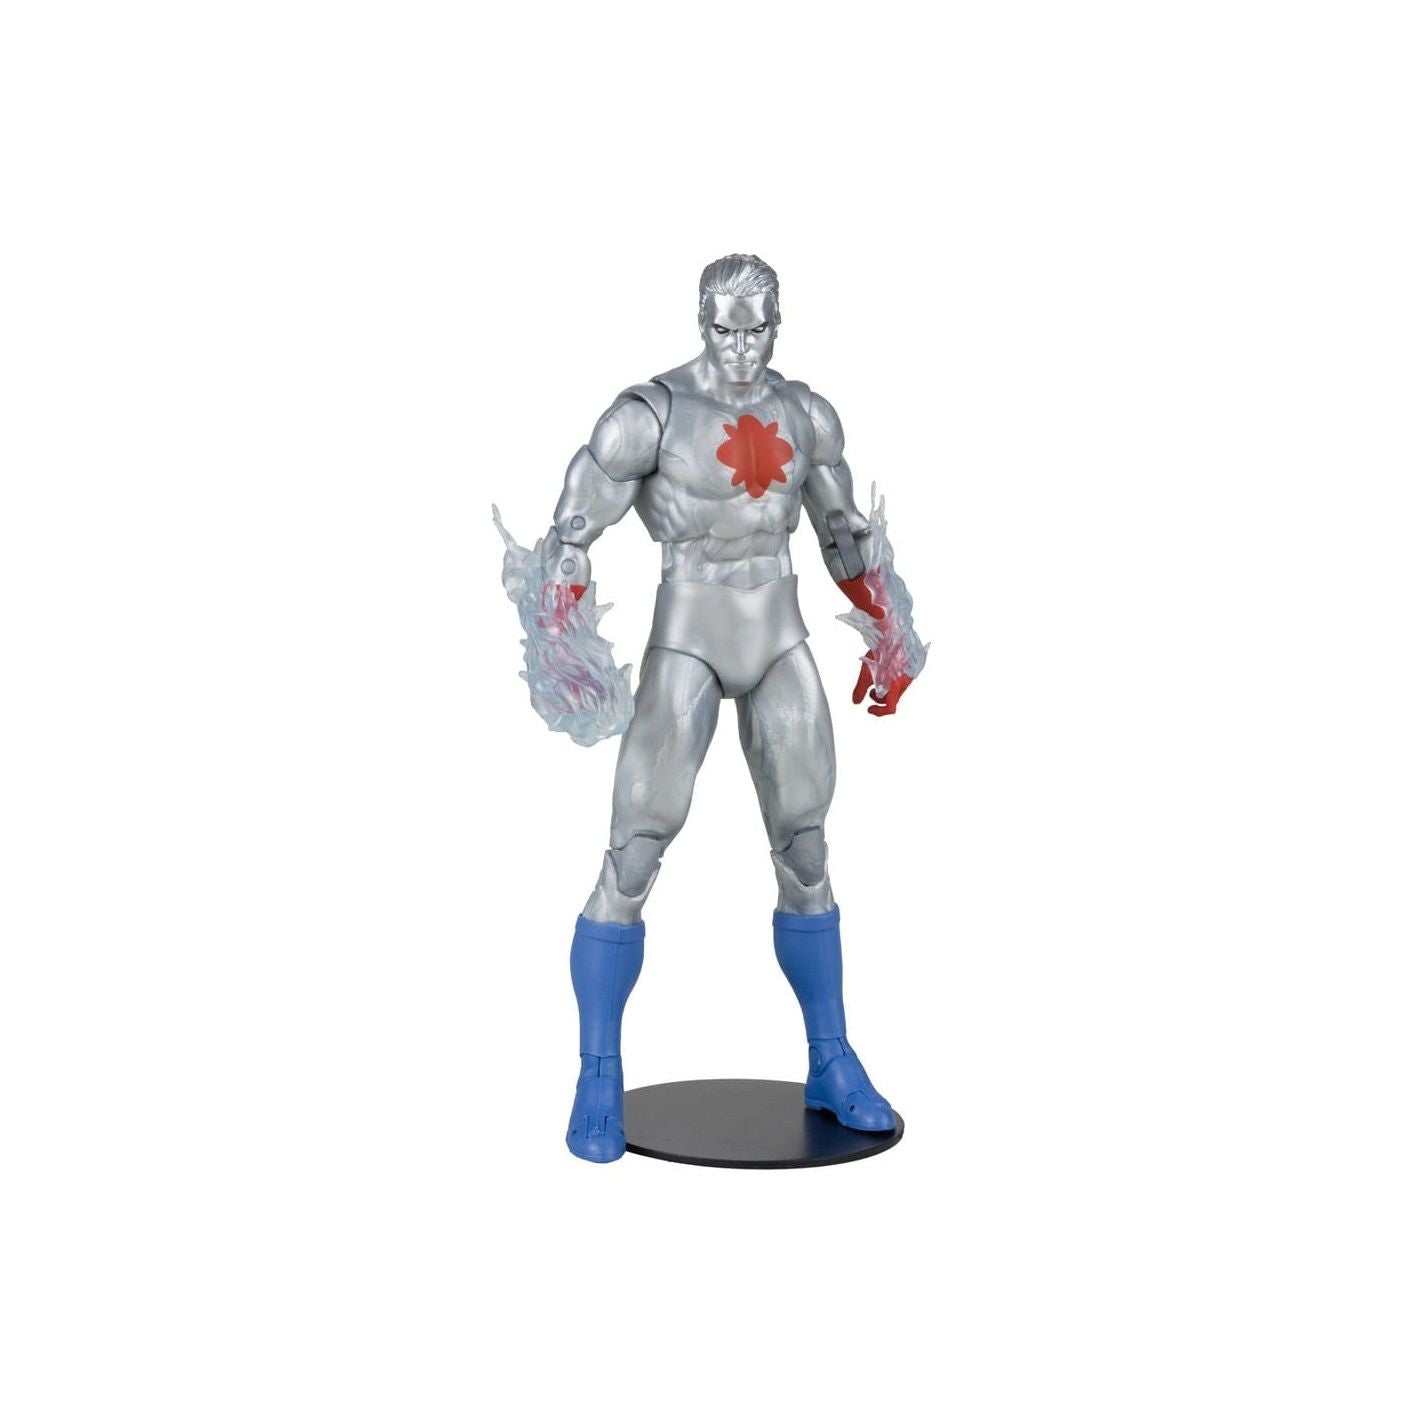 DC Multiverse Captain Atom (New 52) Gold Label Action Figure Toy - Heretoserveyou